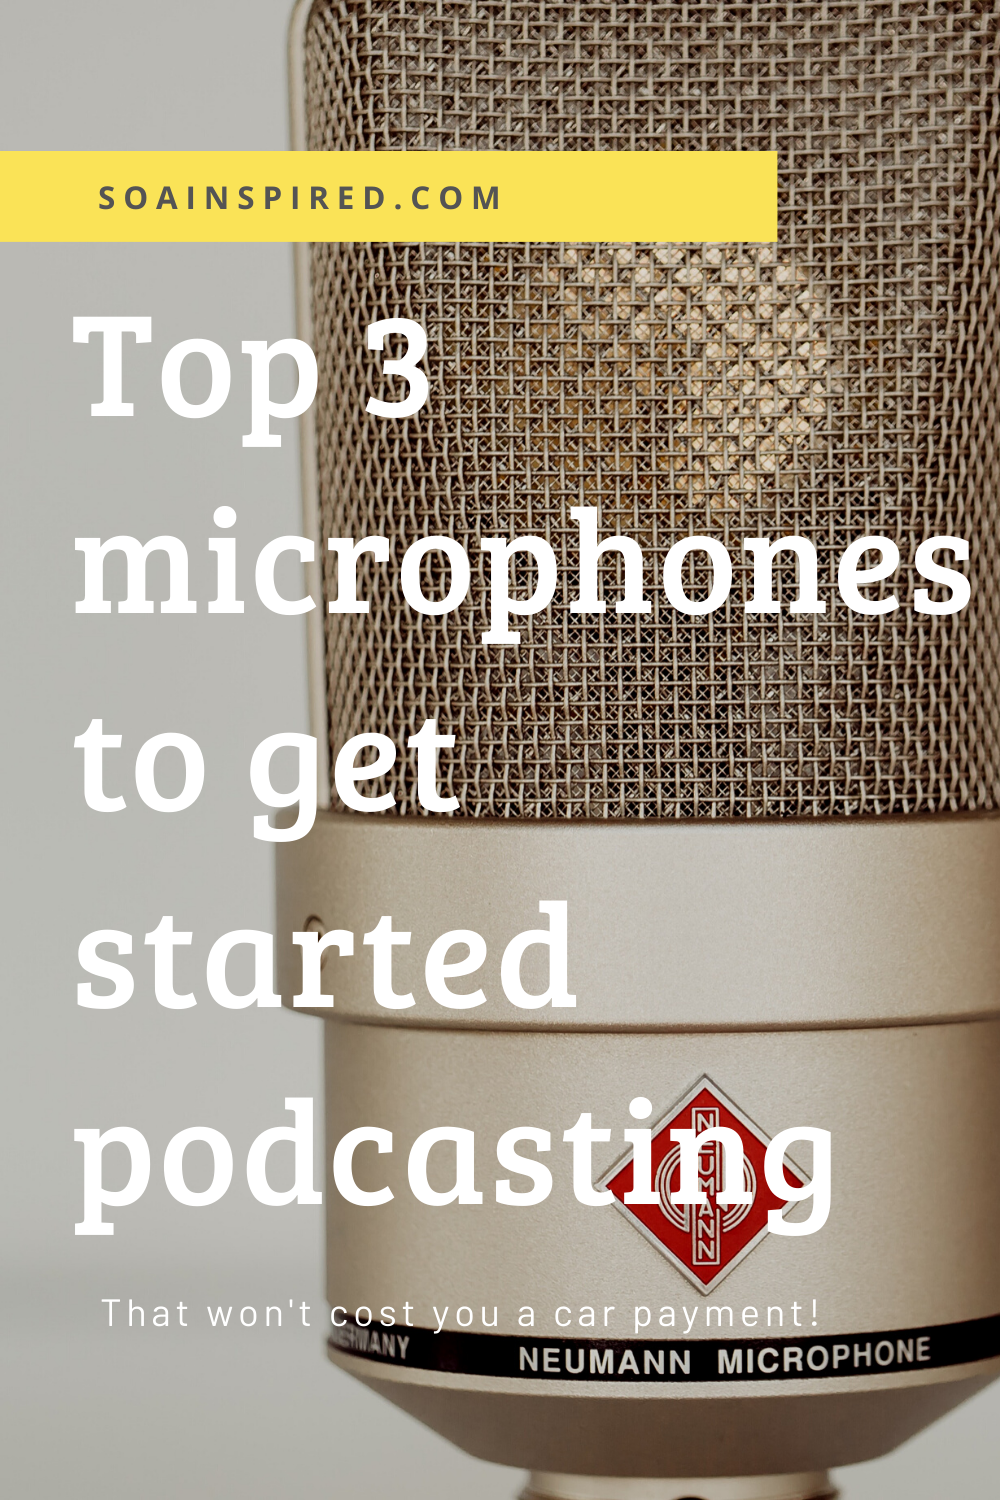 Top 3 Podcasting microphones